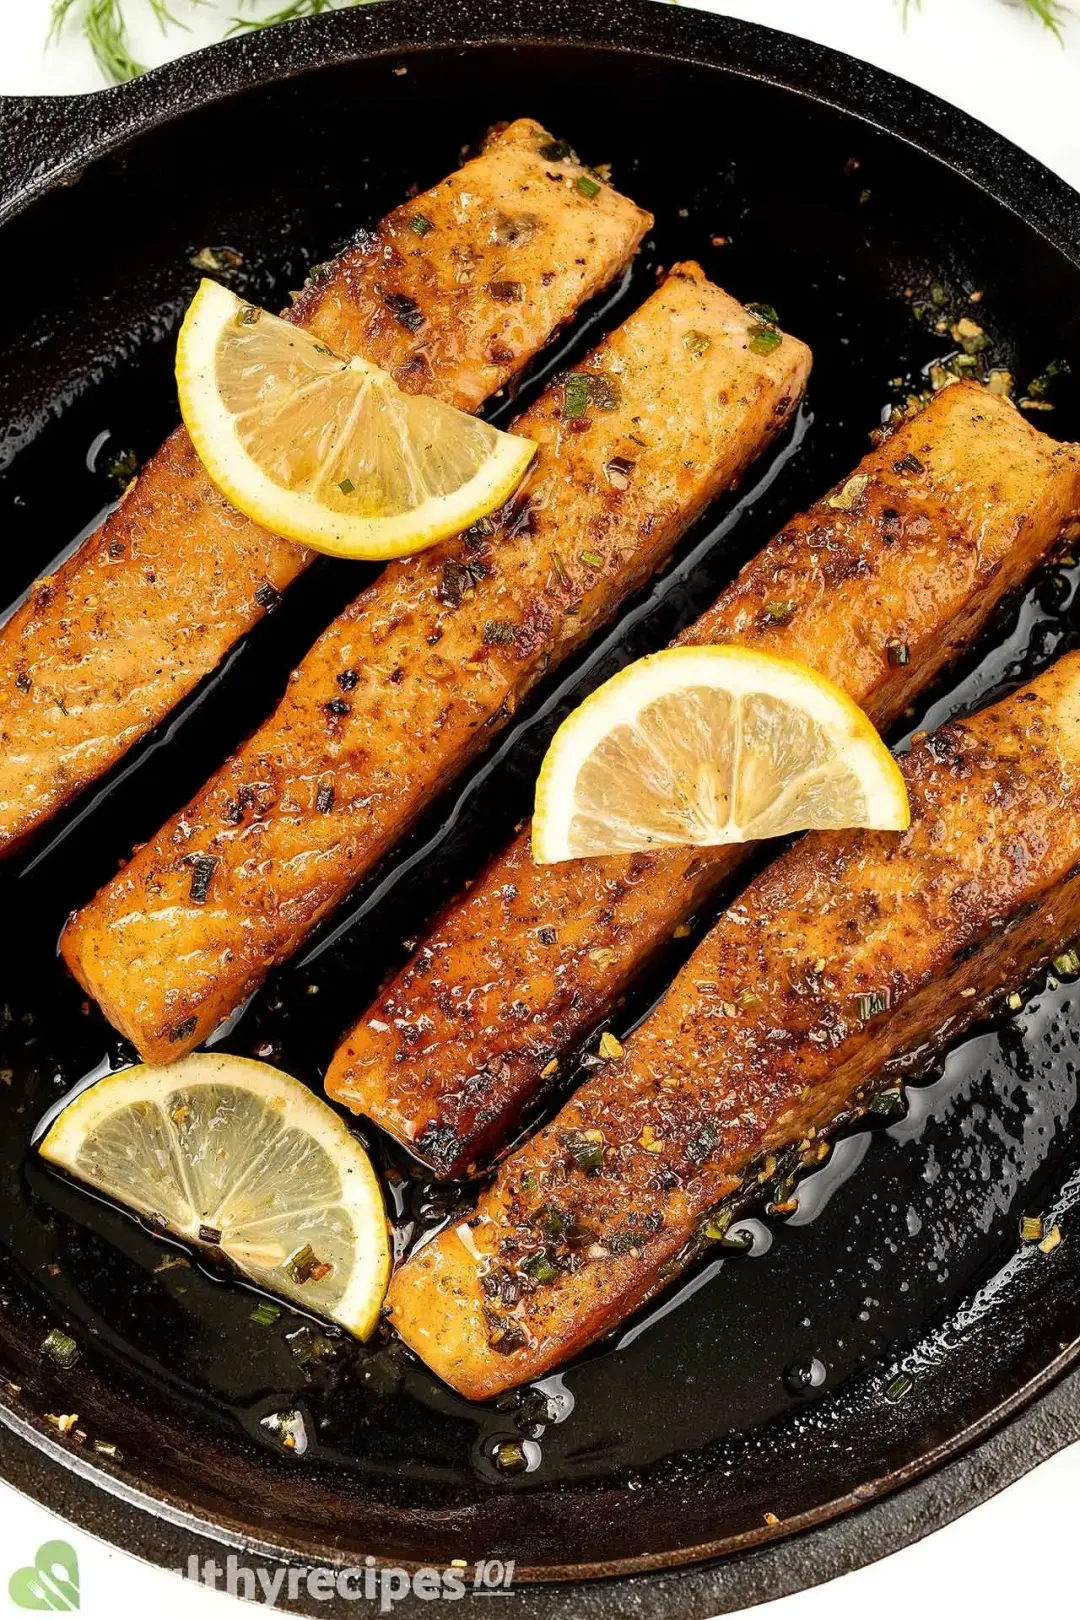 In a glossy cast iron skillet of butter sitting four slices of charred salmon Meuniere filet garnished with lemon slices